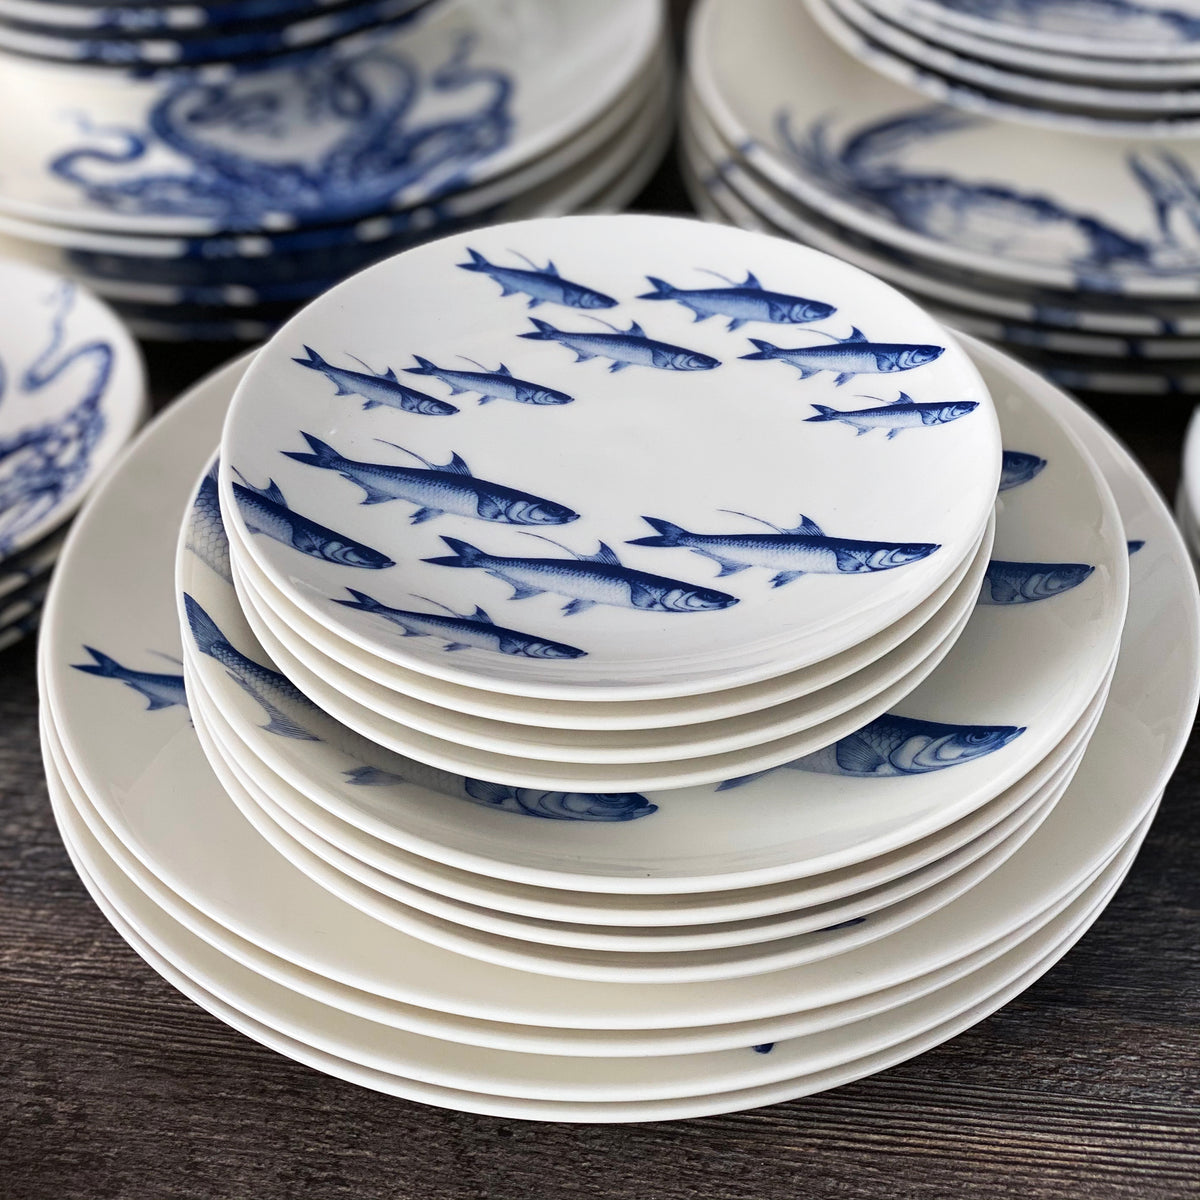 A stack of School of Fish Canapé Plates by Caskata Artisanal Home, featuring fish designs in blue and white.